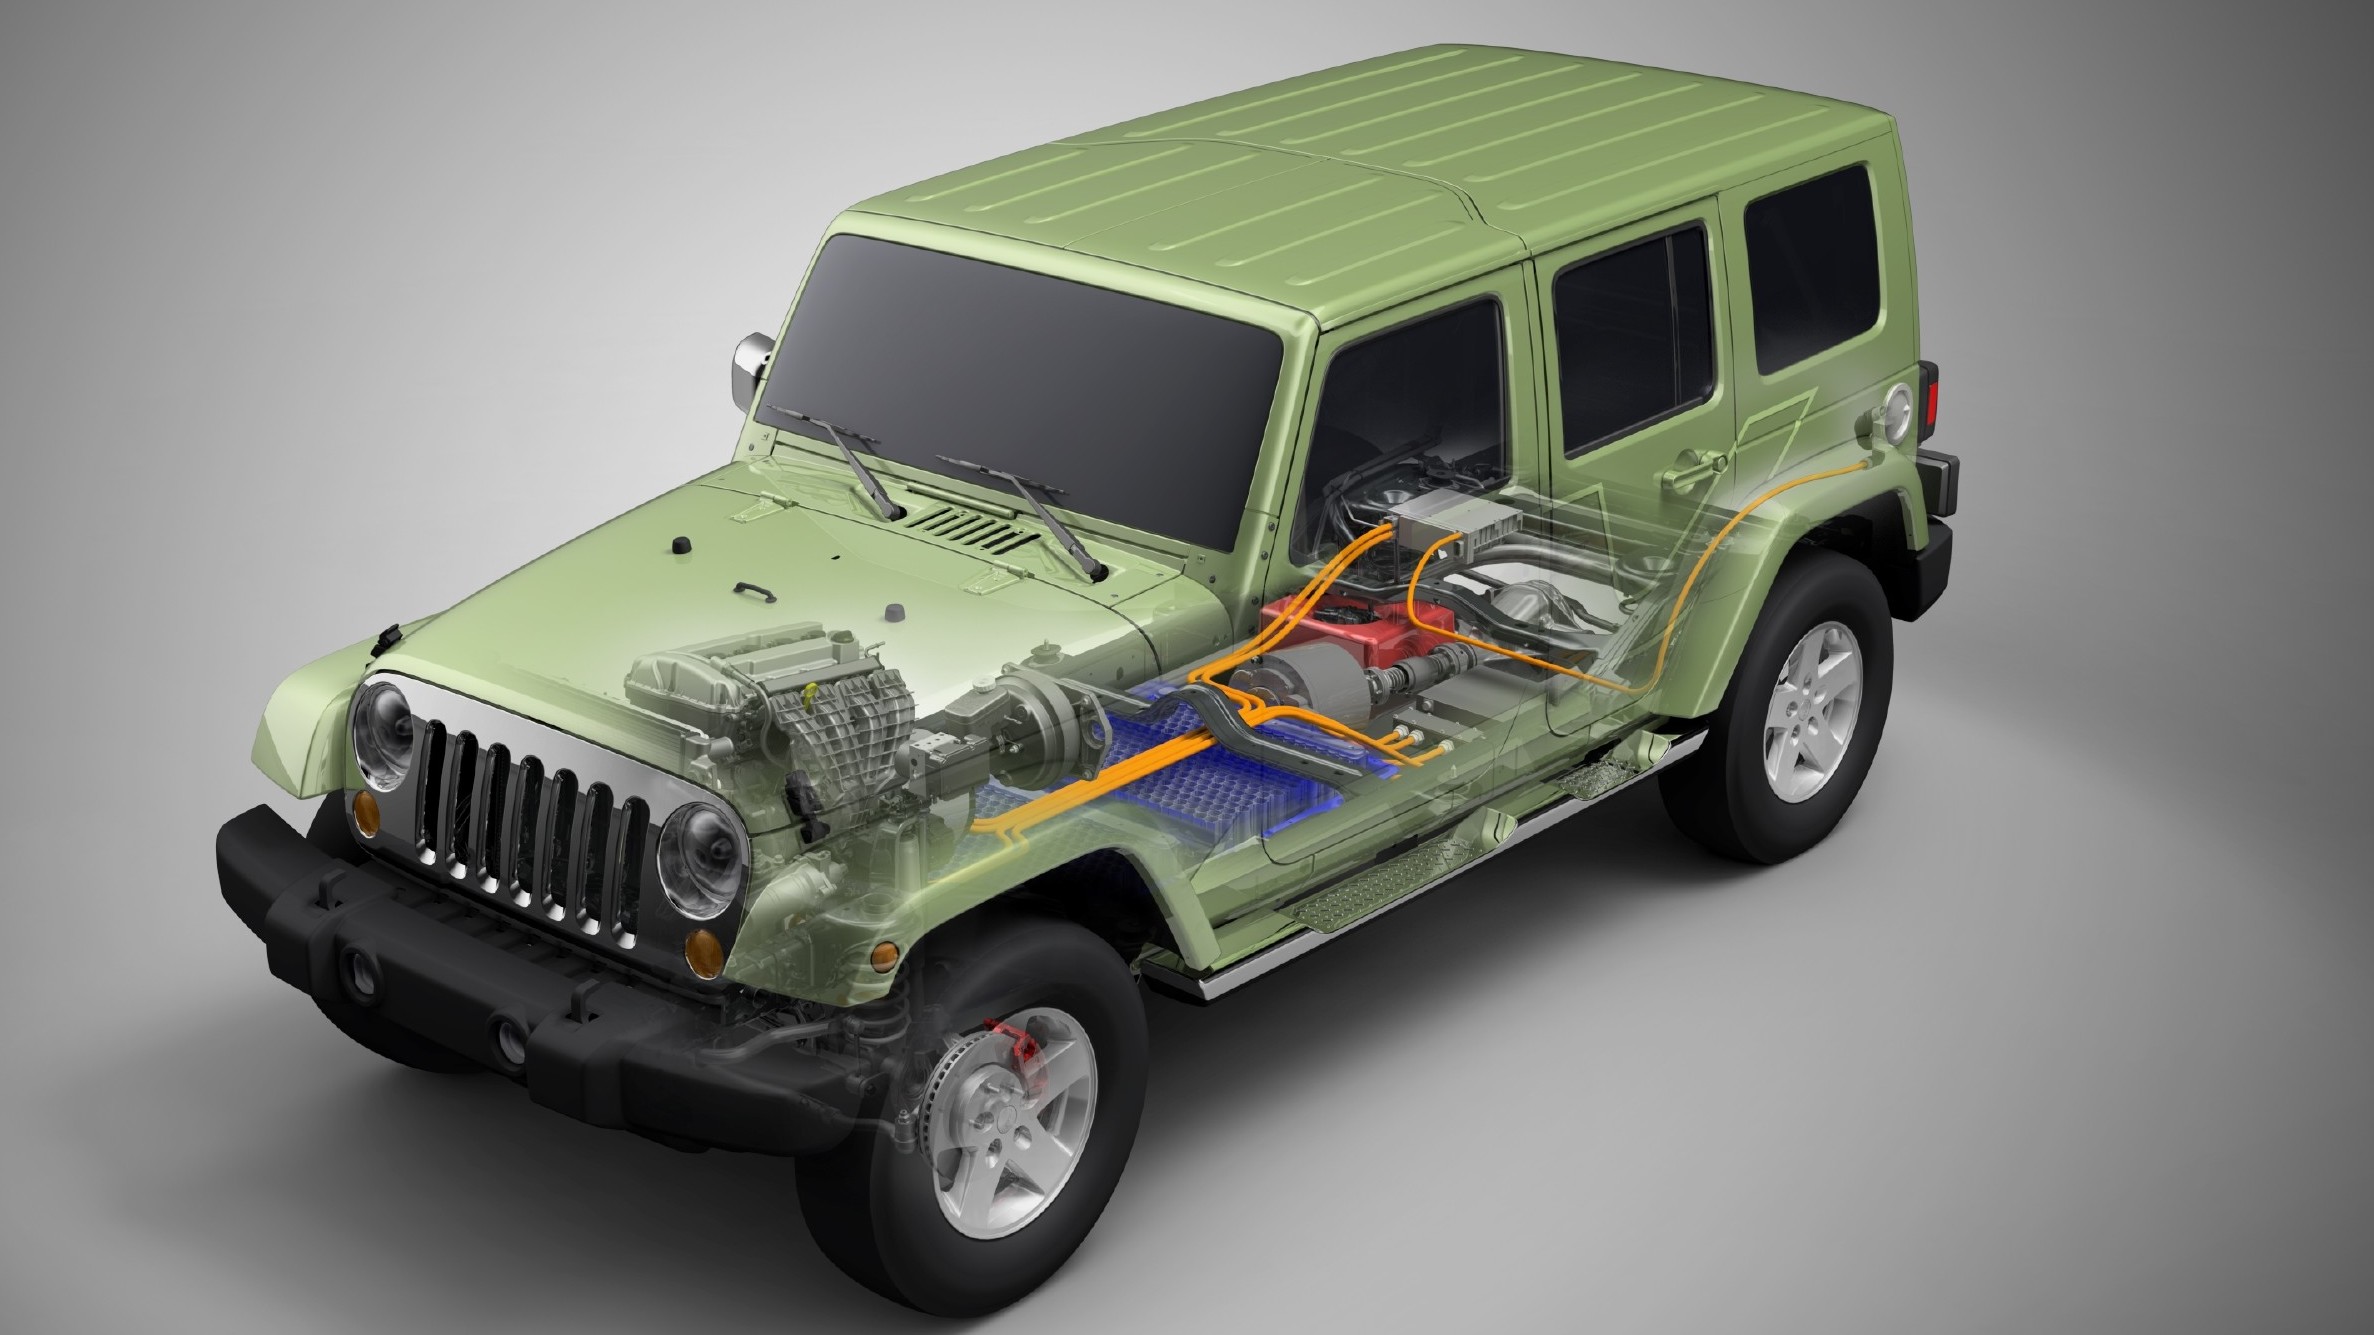 The Electric Jeep Wrangler Concept Looks Like It Was Designed By A High School Shop Class